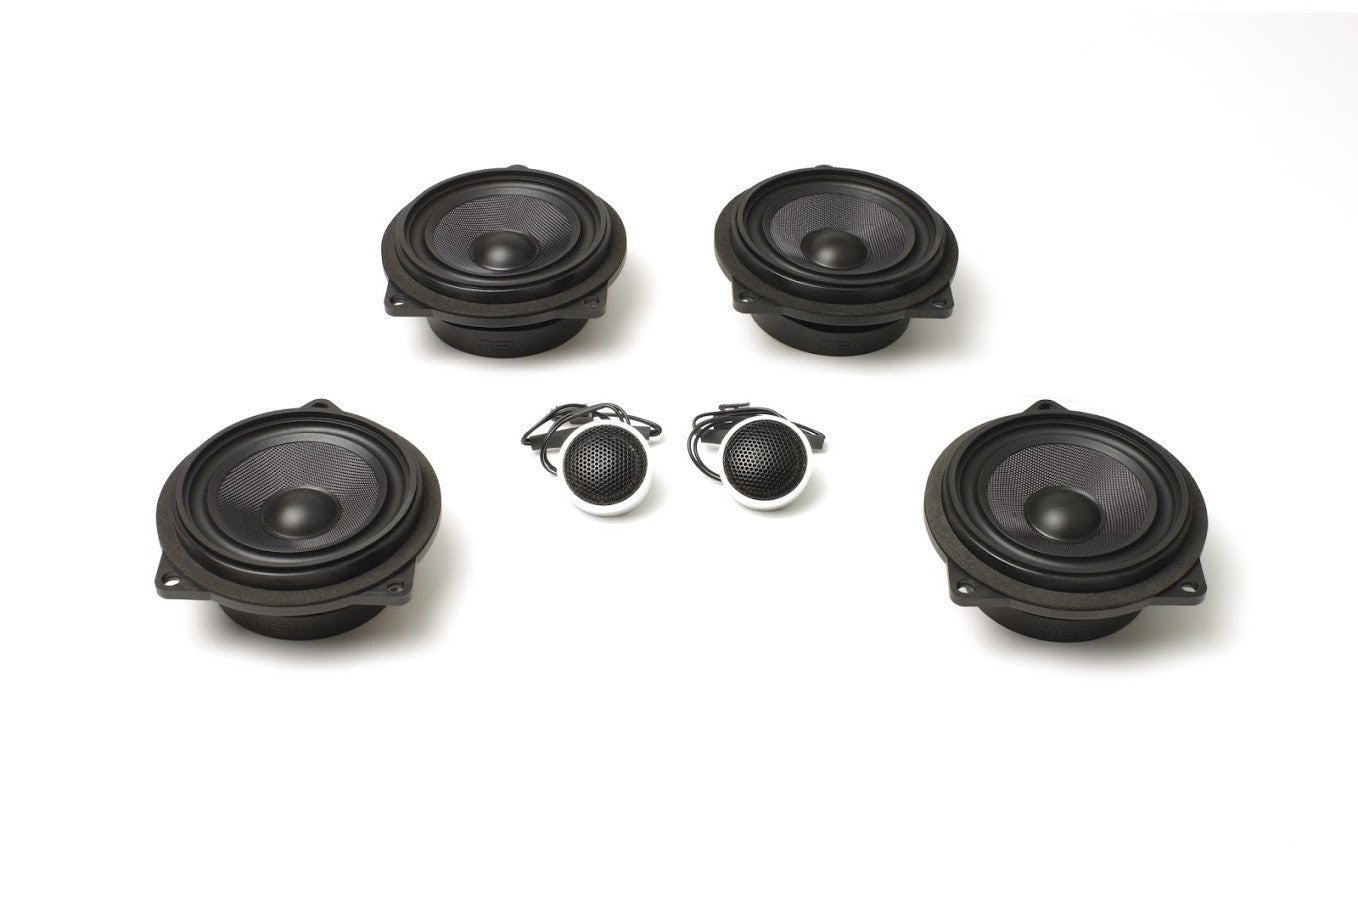 Stage One BMW Speaker Upgrade for E83 X3 with Standard Hi-Fi